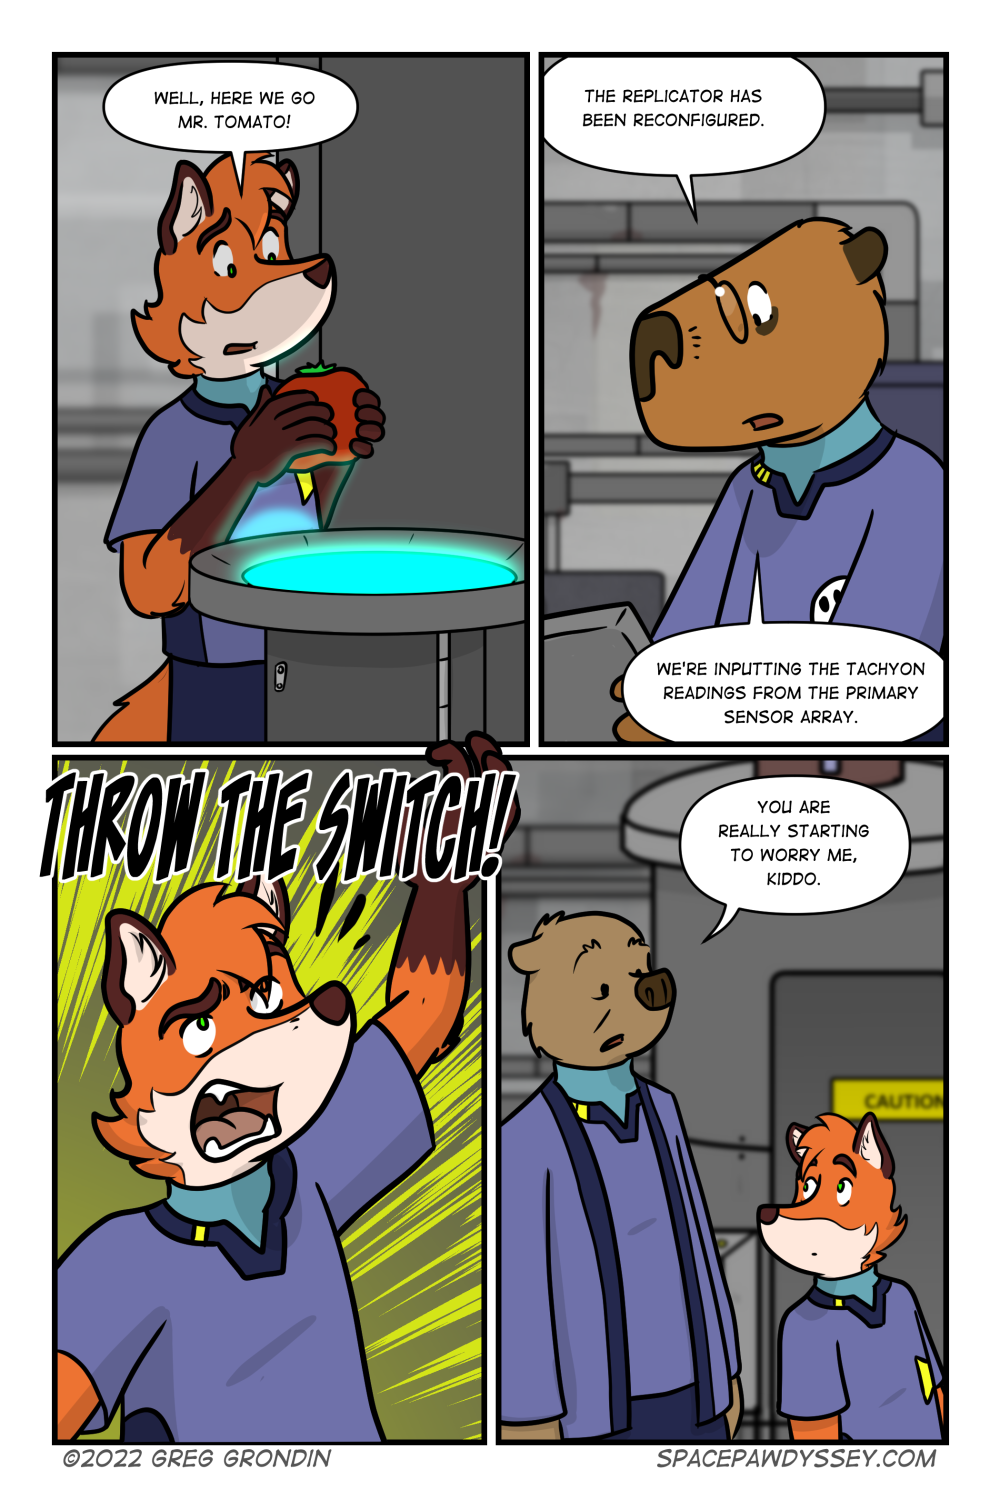 Space Pawdyssey #557